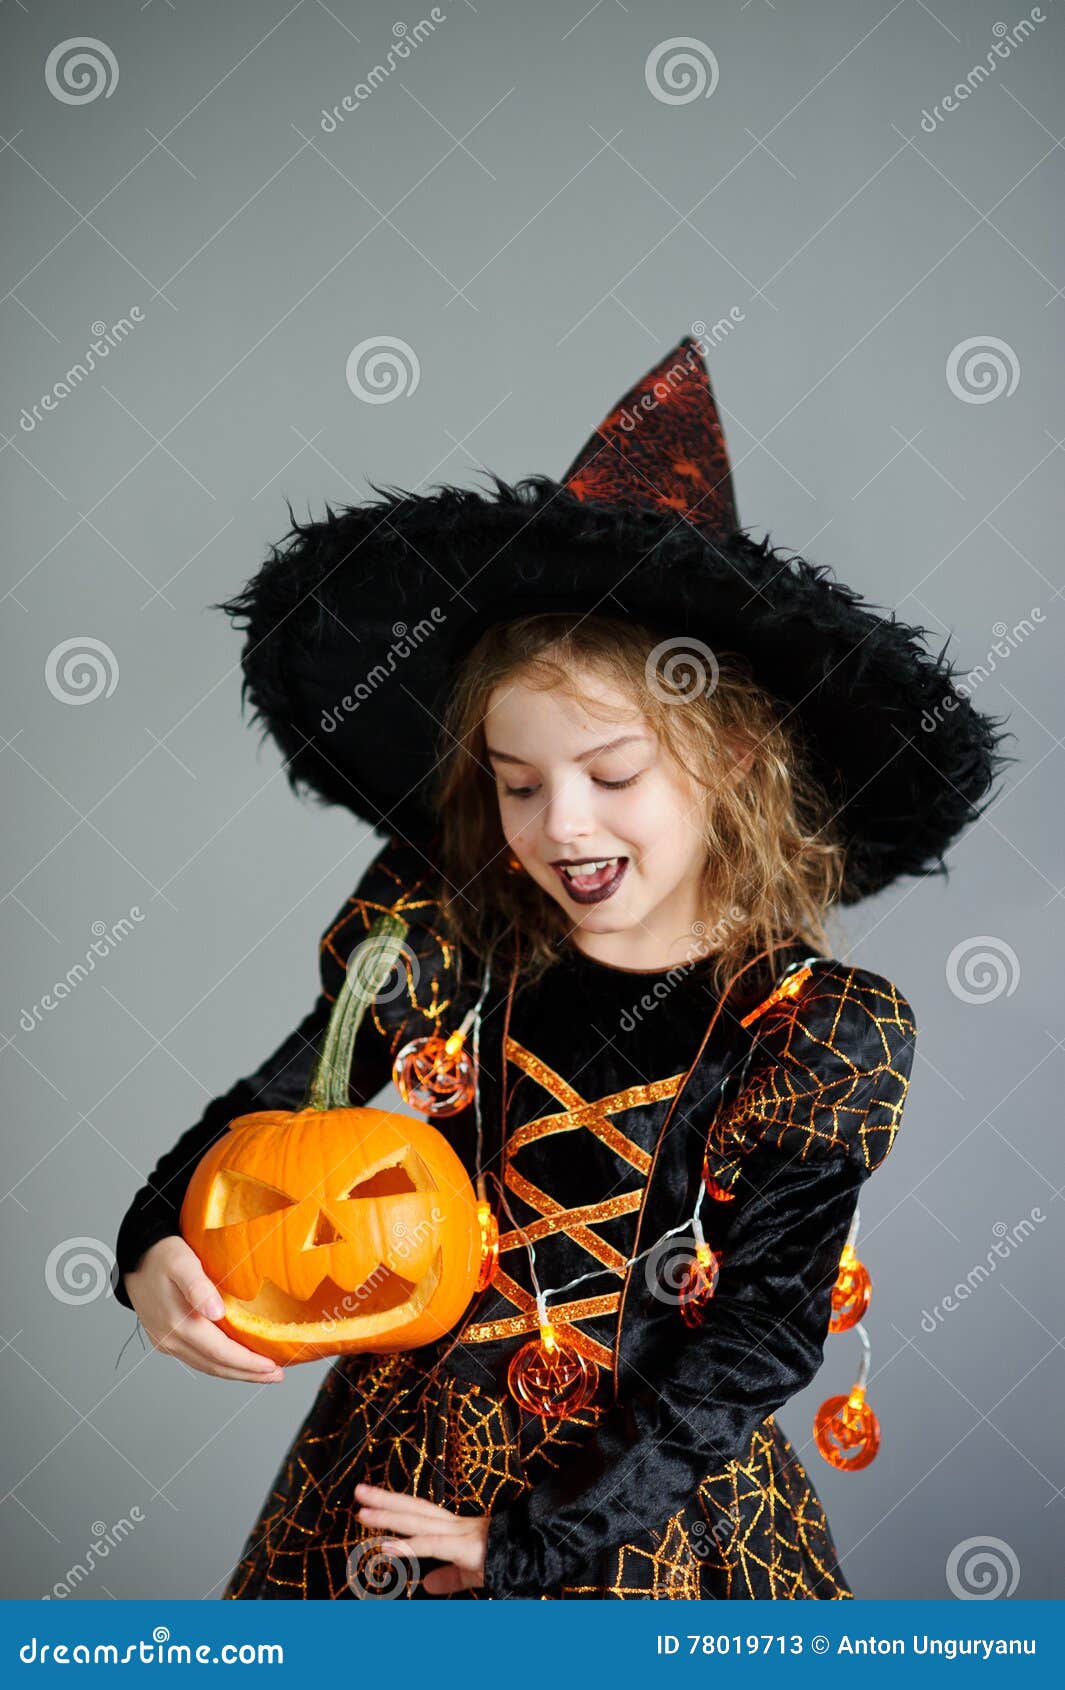 The Girl in a Costume for Halloween. Stock Image - Image of girlie ...